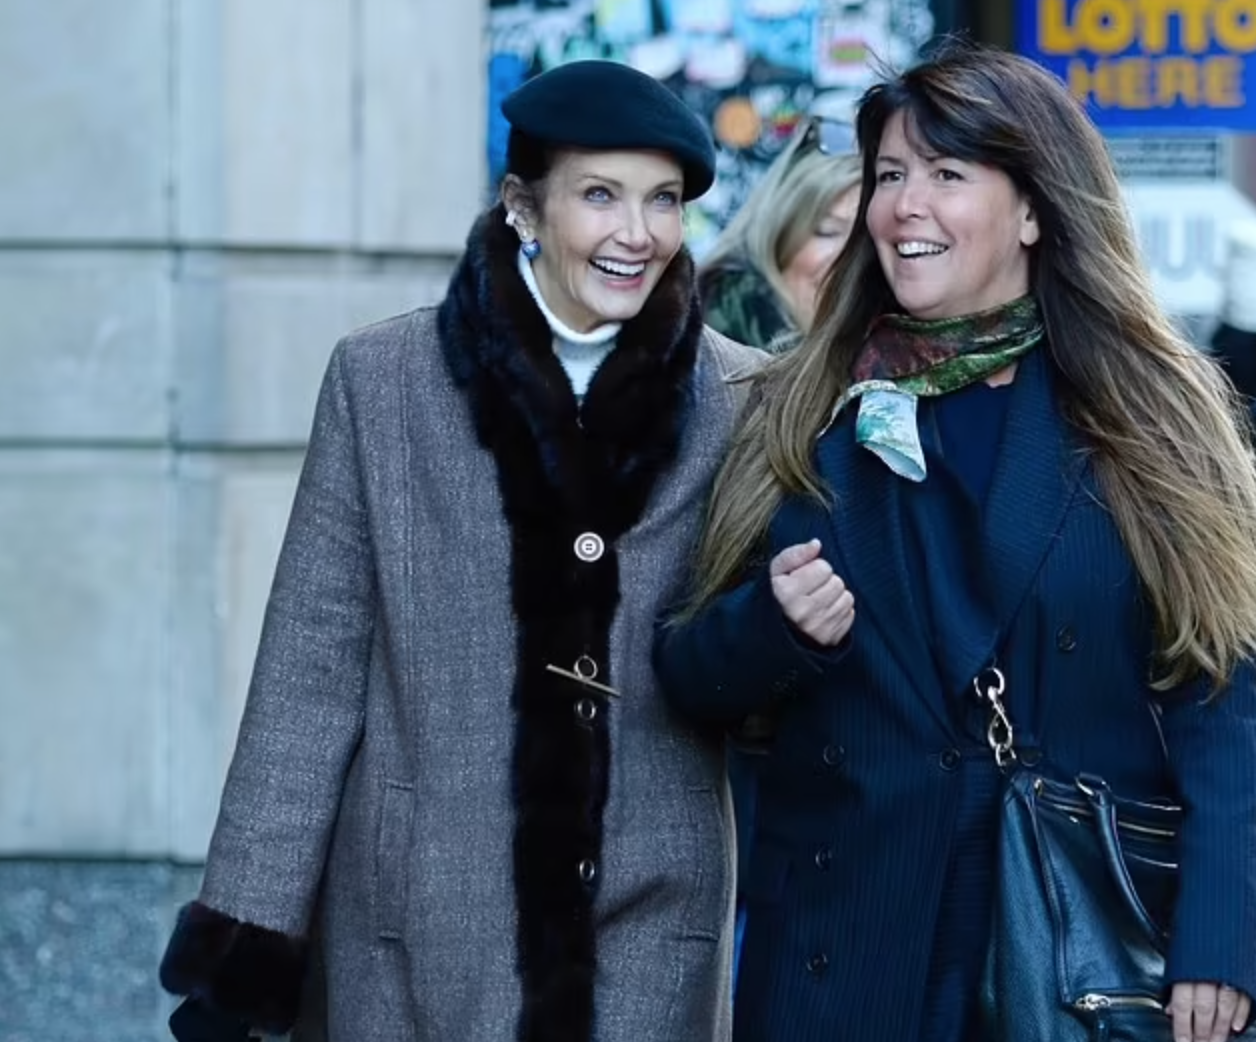 OG Wonder Woman Lynda Carter beams as she walks arm-in-arm with WW franchise director Patty Jenkins in NYC